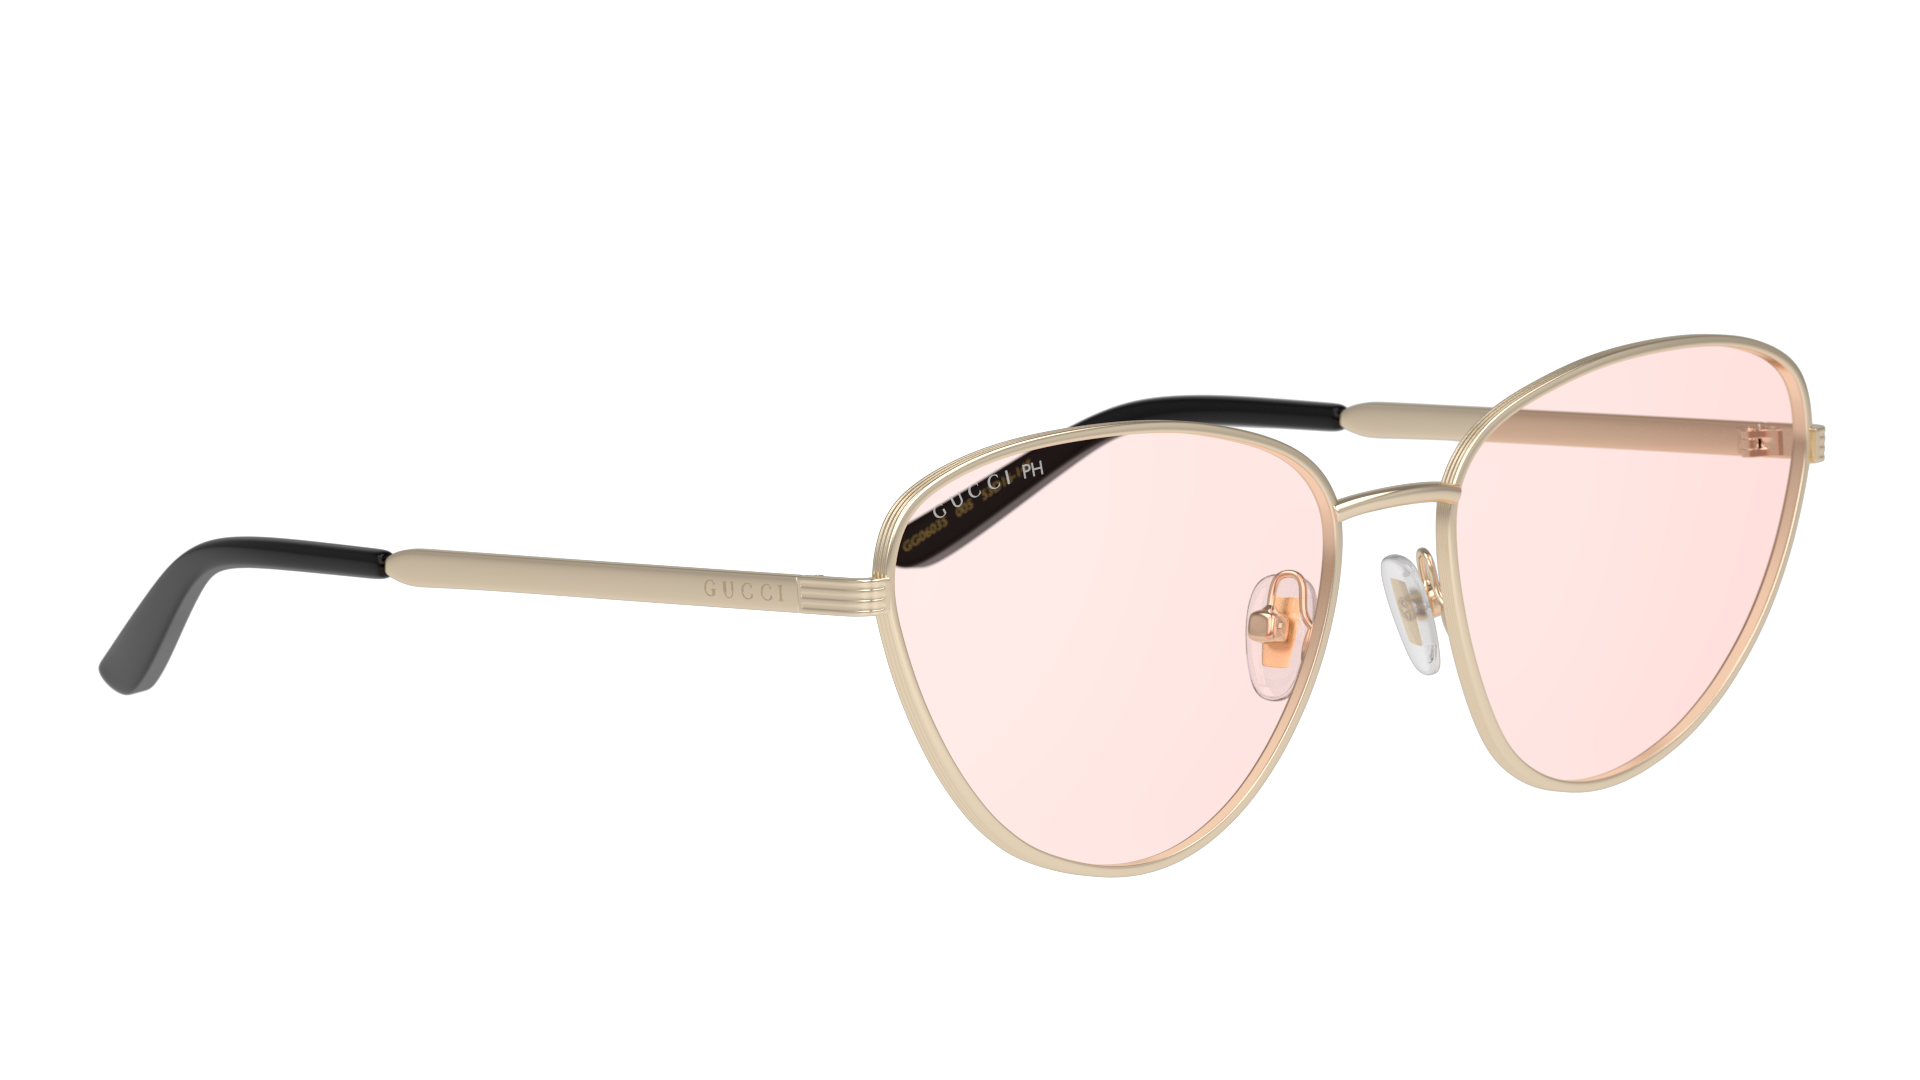 Angle_Right01 Gucci Blue & Beyond GG 0803S (005) Sunglasses Pink / Gold